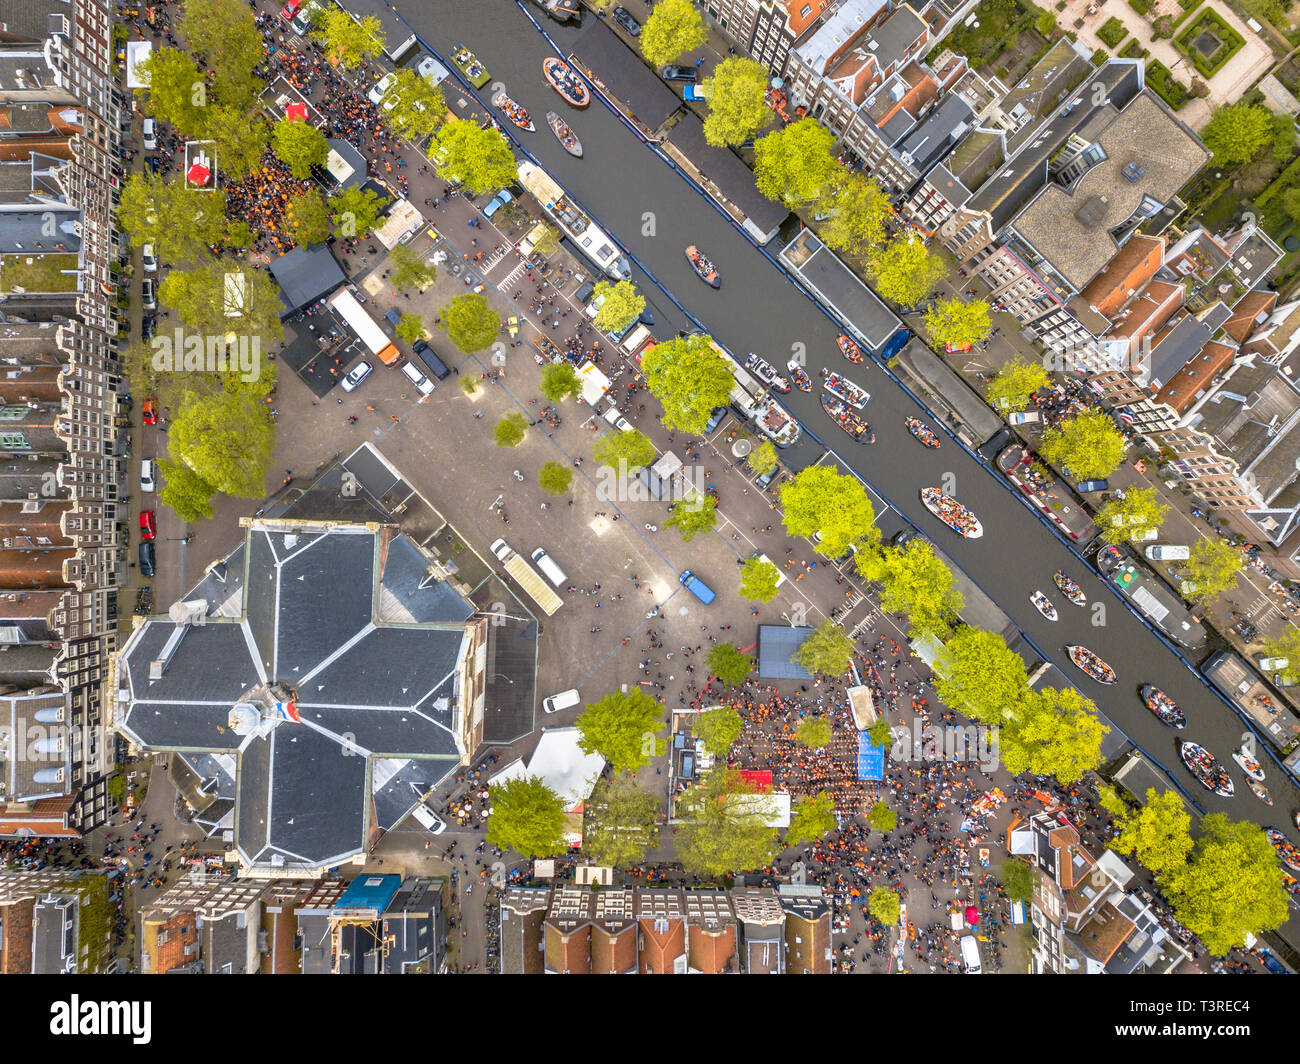 Market square Noordermarkt on Koningsdag Kings day festivities in Amsterdam. Birthday of the king. Seen from helicopter. Stock Photo